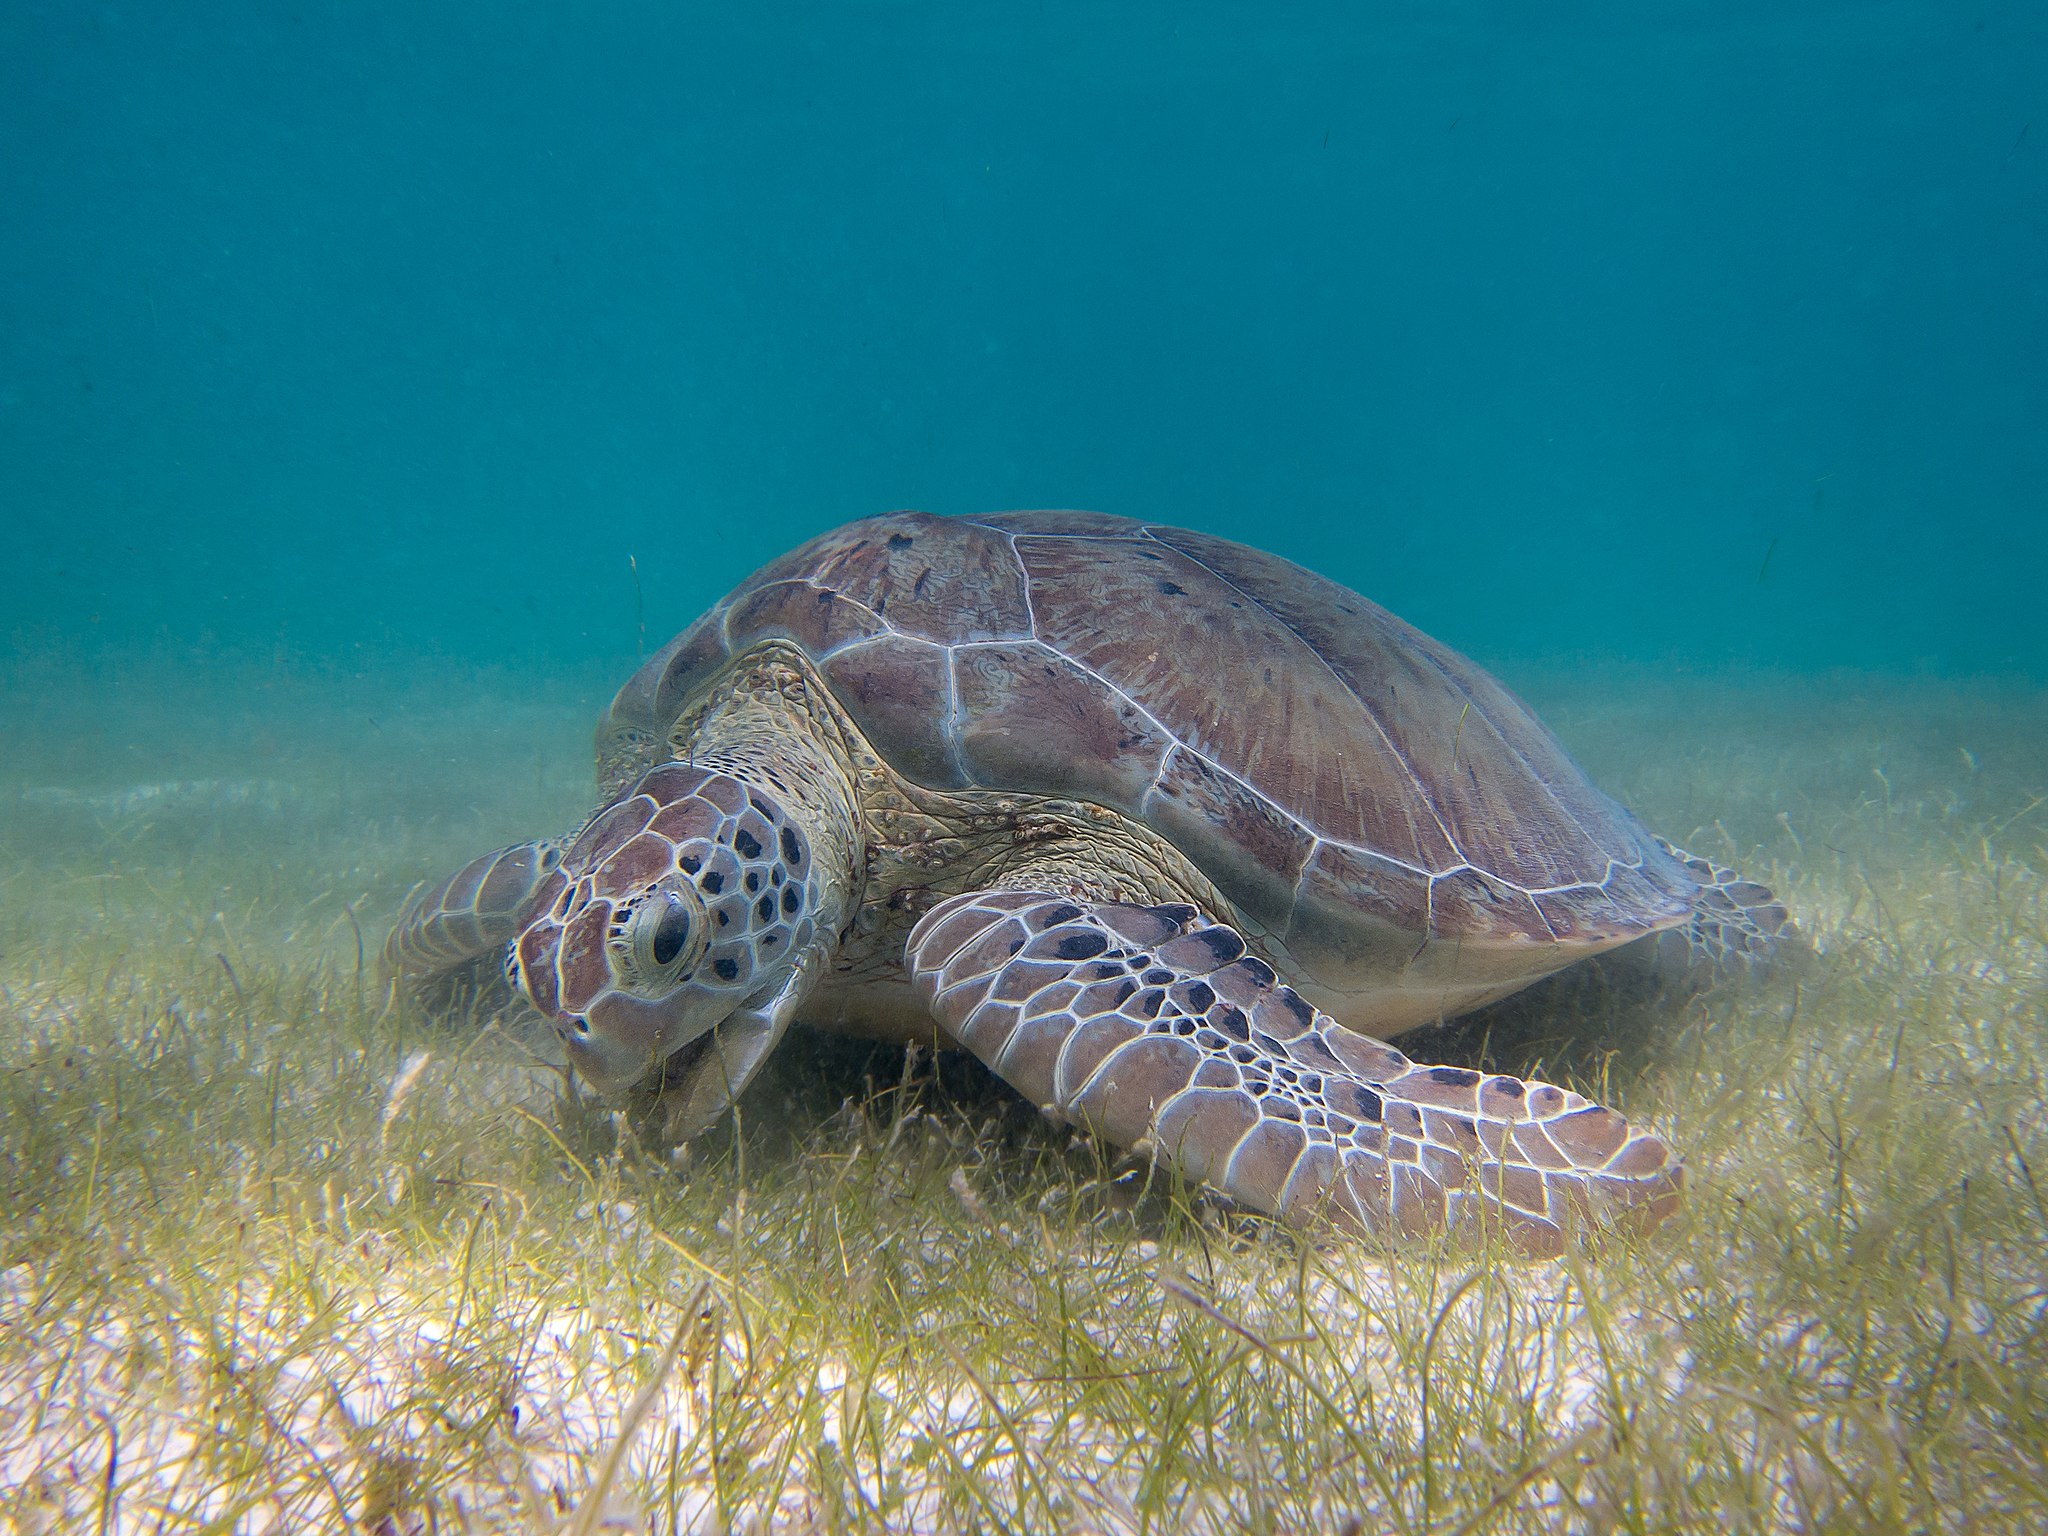 Seagrass meadows harbor wildlife for centuries, highlighting need for conservation